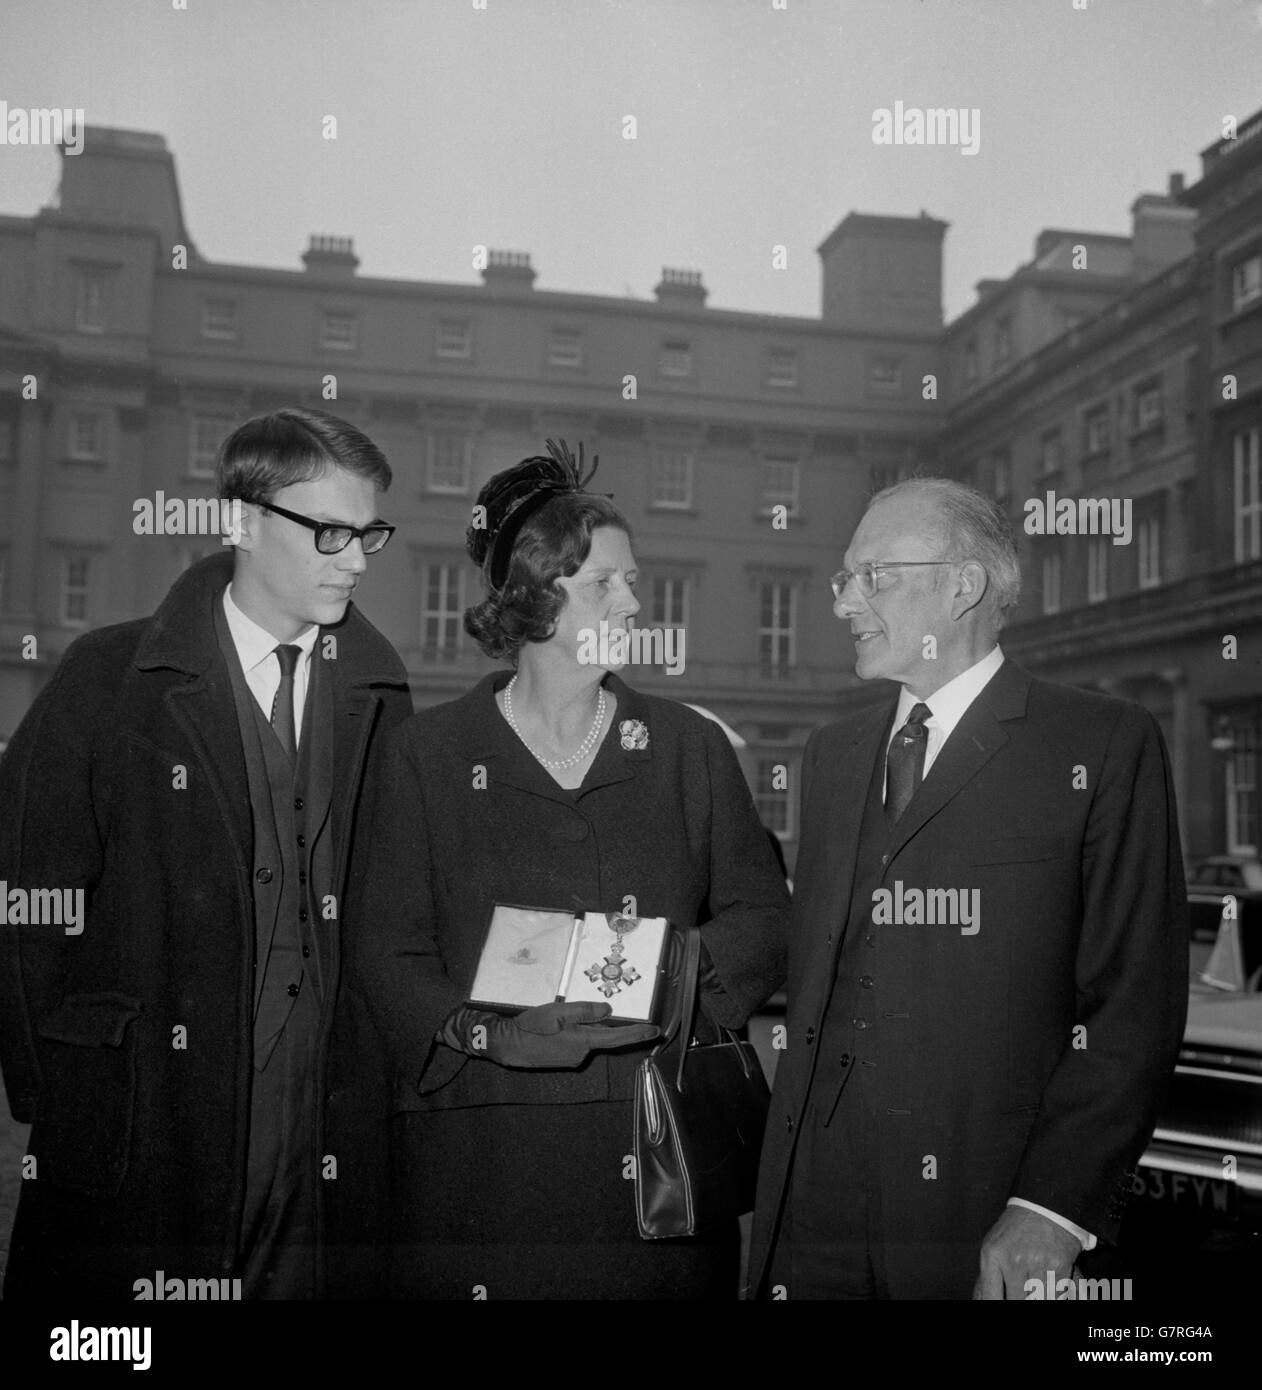 Yachting - Francis Chichester - investitura regale - Buckingham Palace Foto Stock